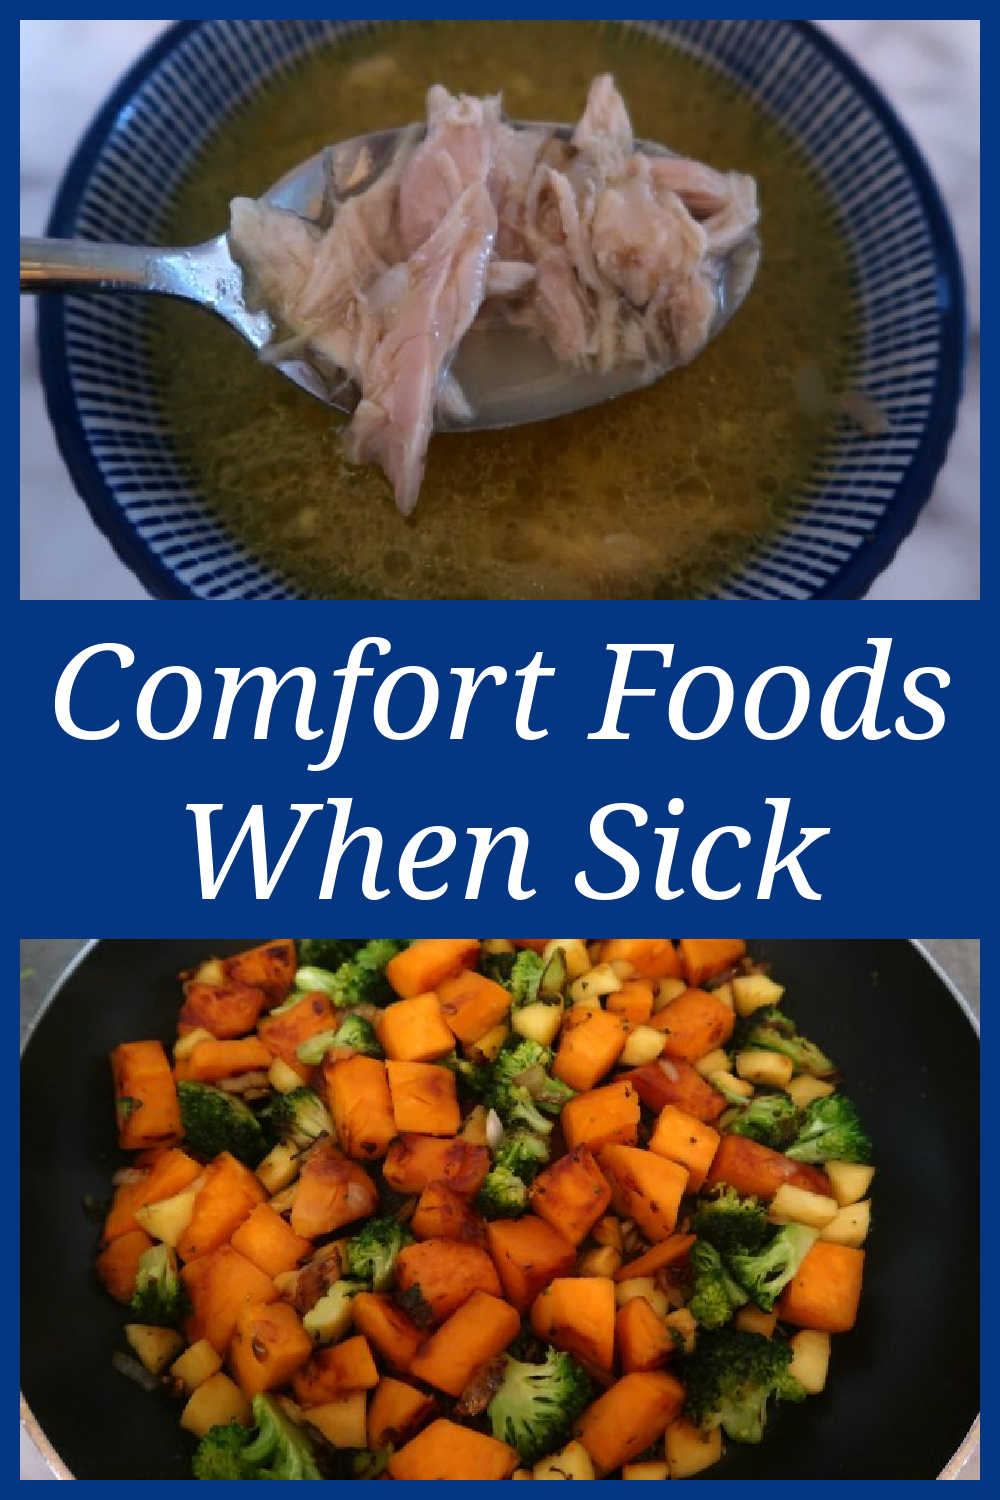 Comfort Foods When Sick The Best Recipes And Meals To Eat Food Ideas For When Youre Unwell And Need Comforting. 